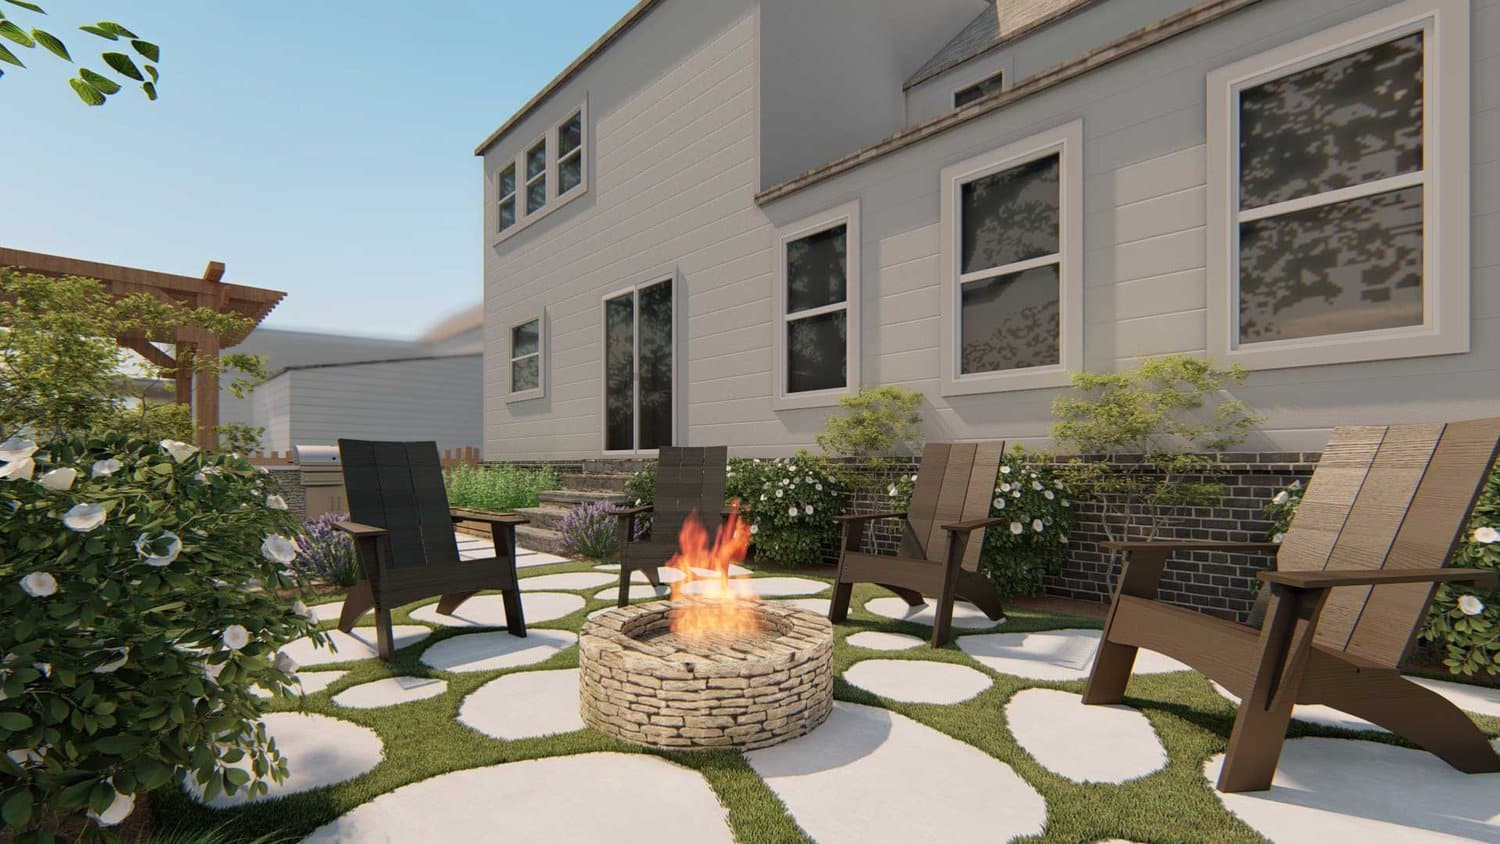 Arlington outdoor grass and concrete paver patio with fire pit seating area